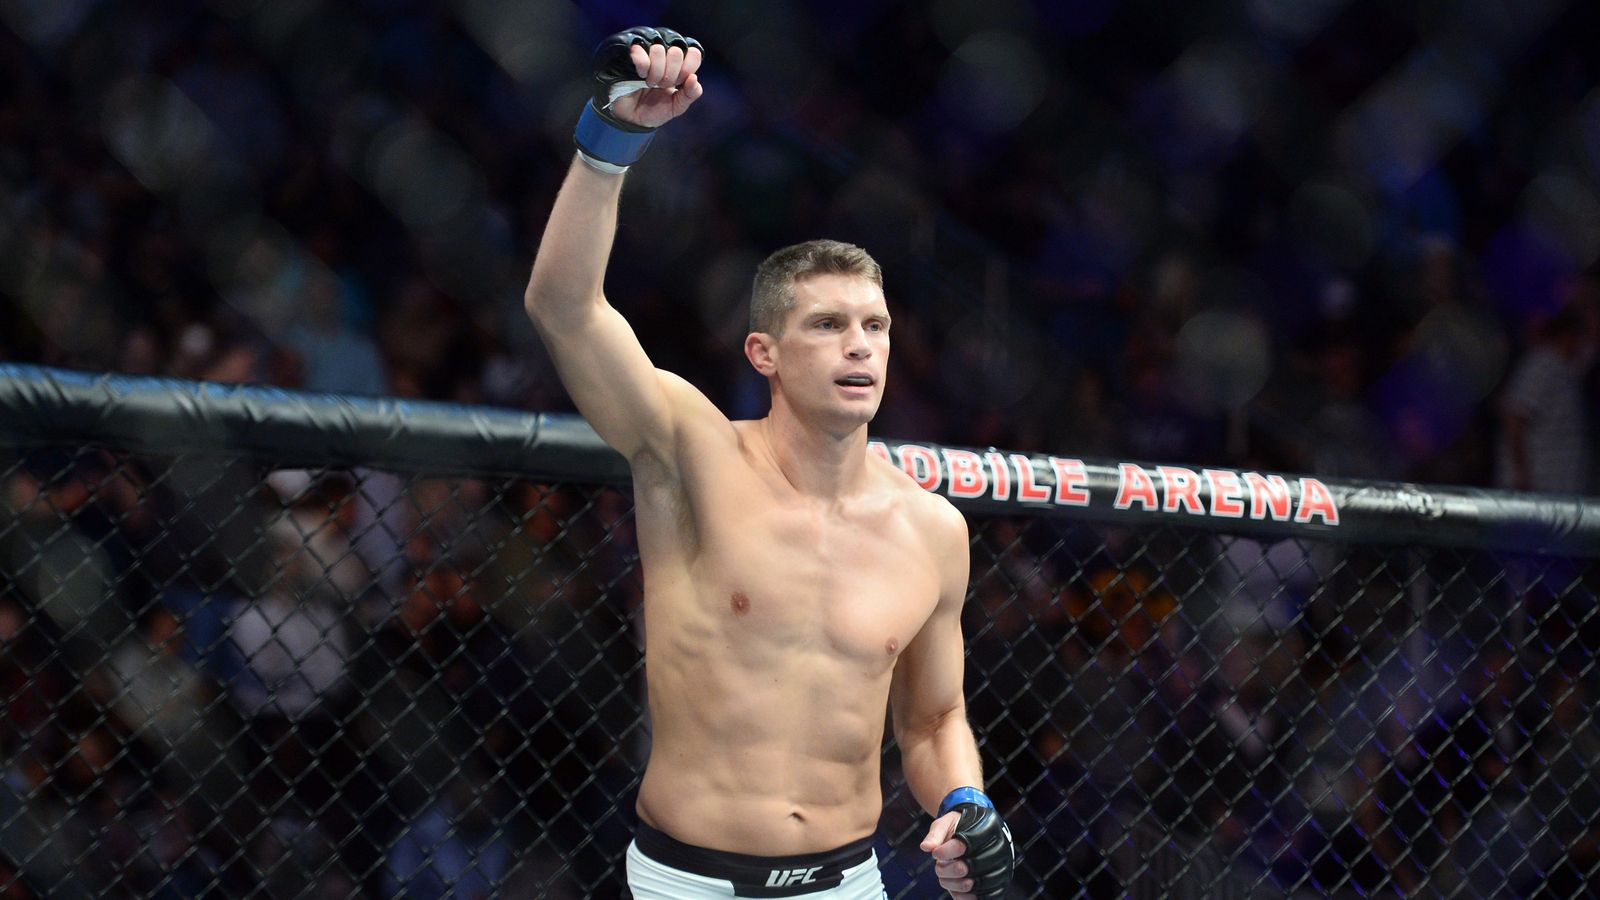 Stephen Thompson: Say Hello To The Bad Guy